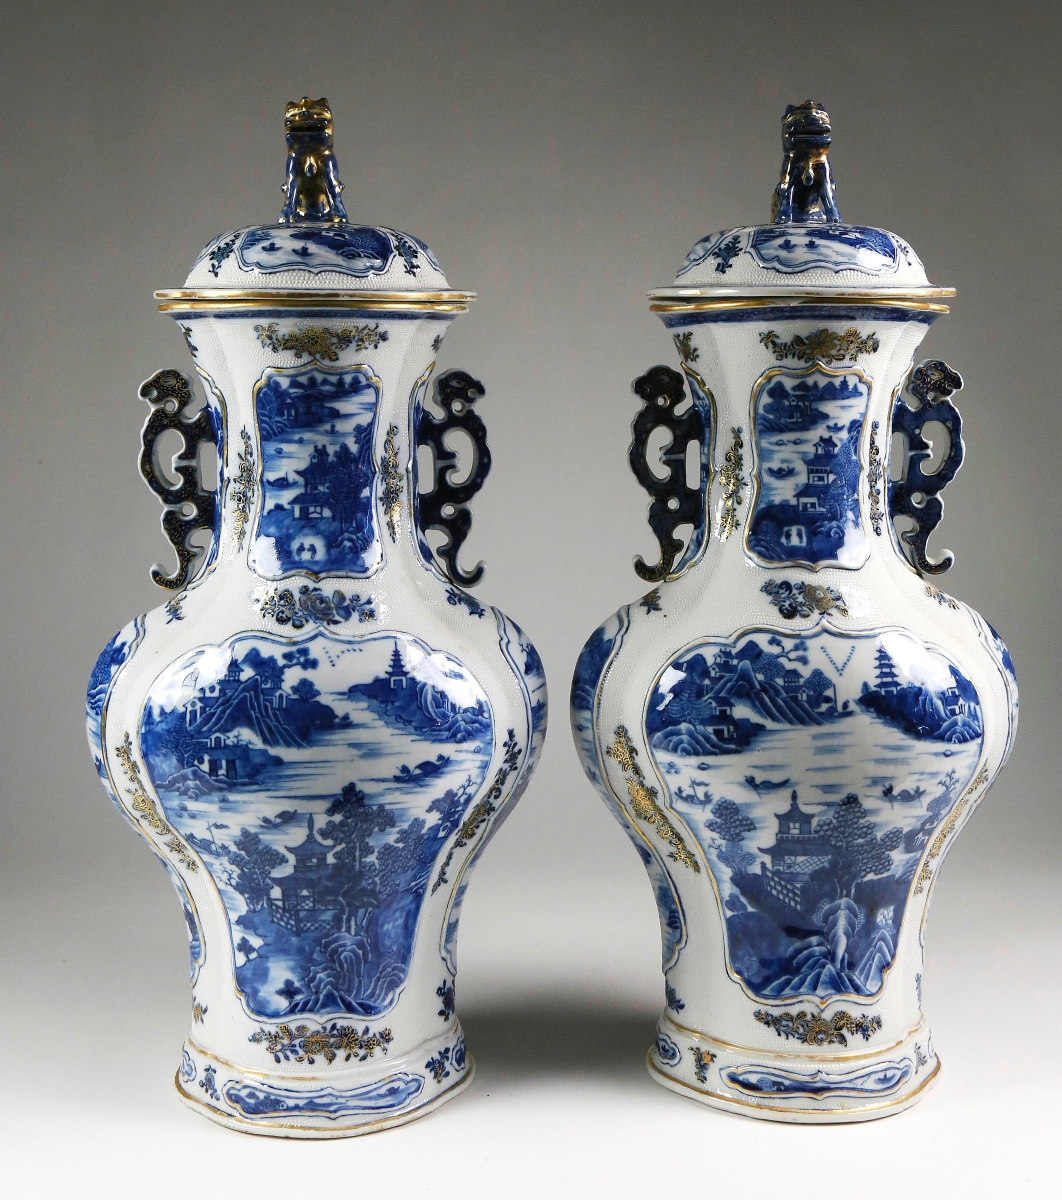 A longtime Osona client decided to surprise his wife with a gift of this pair of Eighteenth Century Chinese export porcelain baluster vases with covers. He prevailed on the phone, paying $54,900 for the 21-inch-high vases that featured blue underglaze, ten cartouche-shaped on-versa pieces reserved from a chicken skin ground, applied leopard handles, foo lion finials, embellished with gilt detailing.